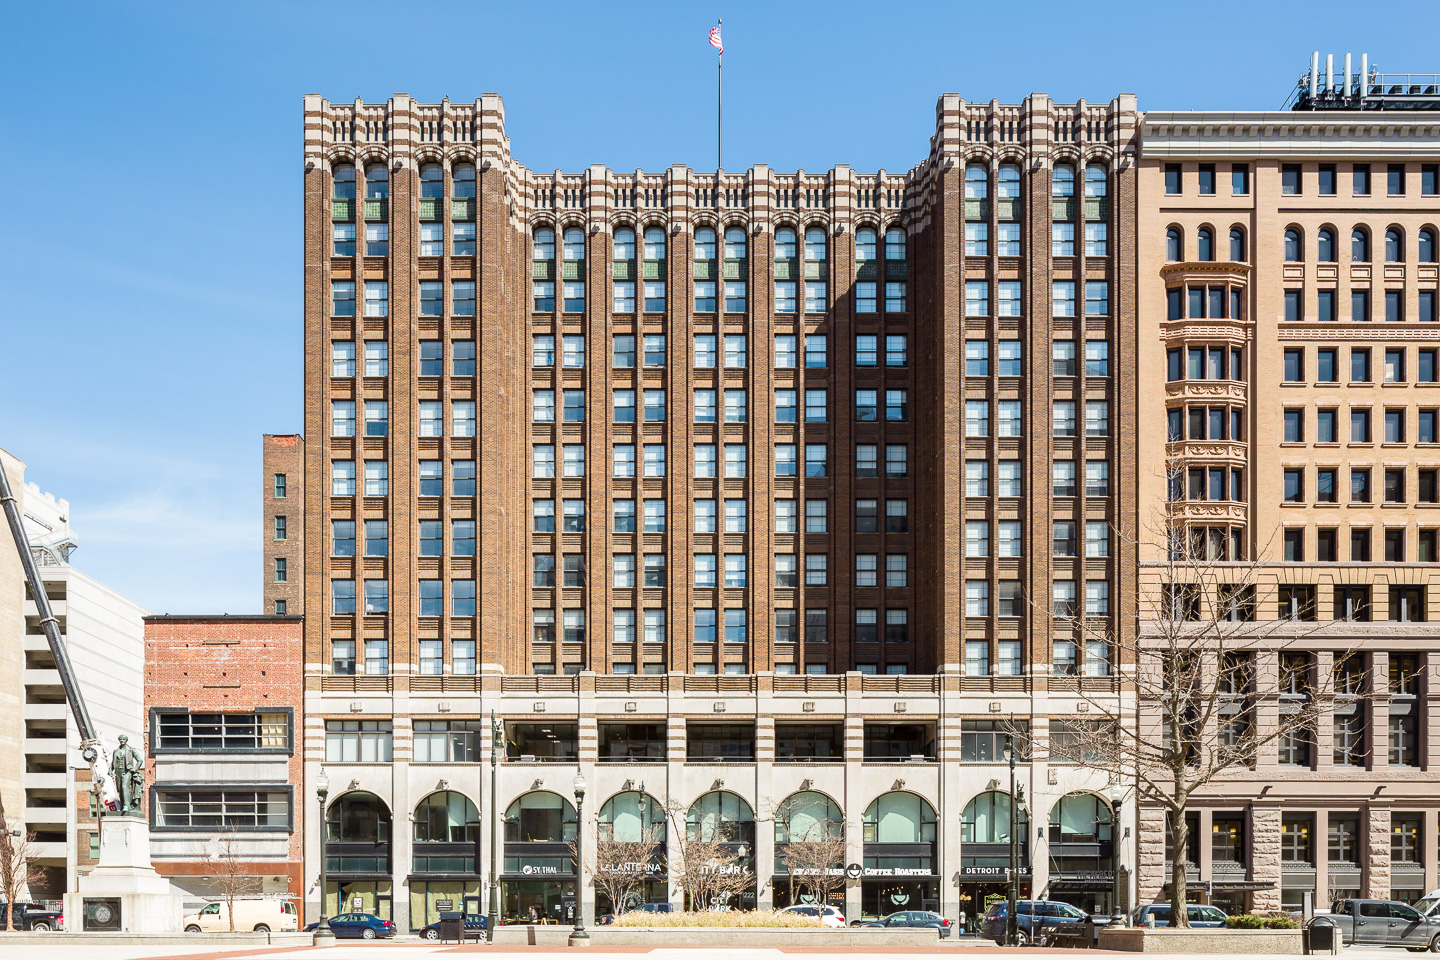 Exterior photograph of Griswold Building in Detroit, Michigan by architect Albert Kahn.